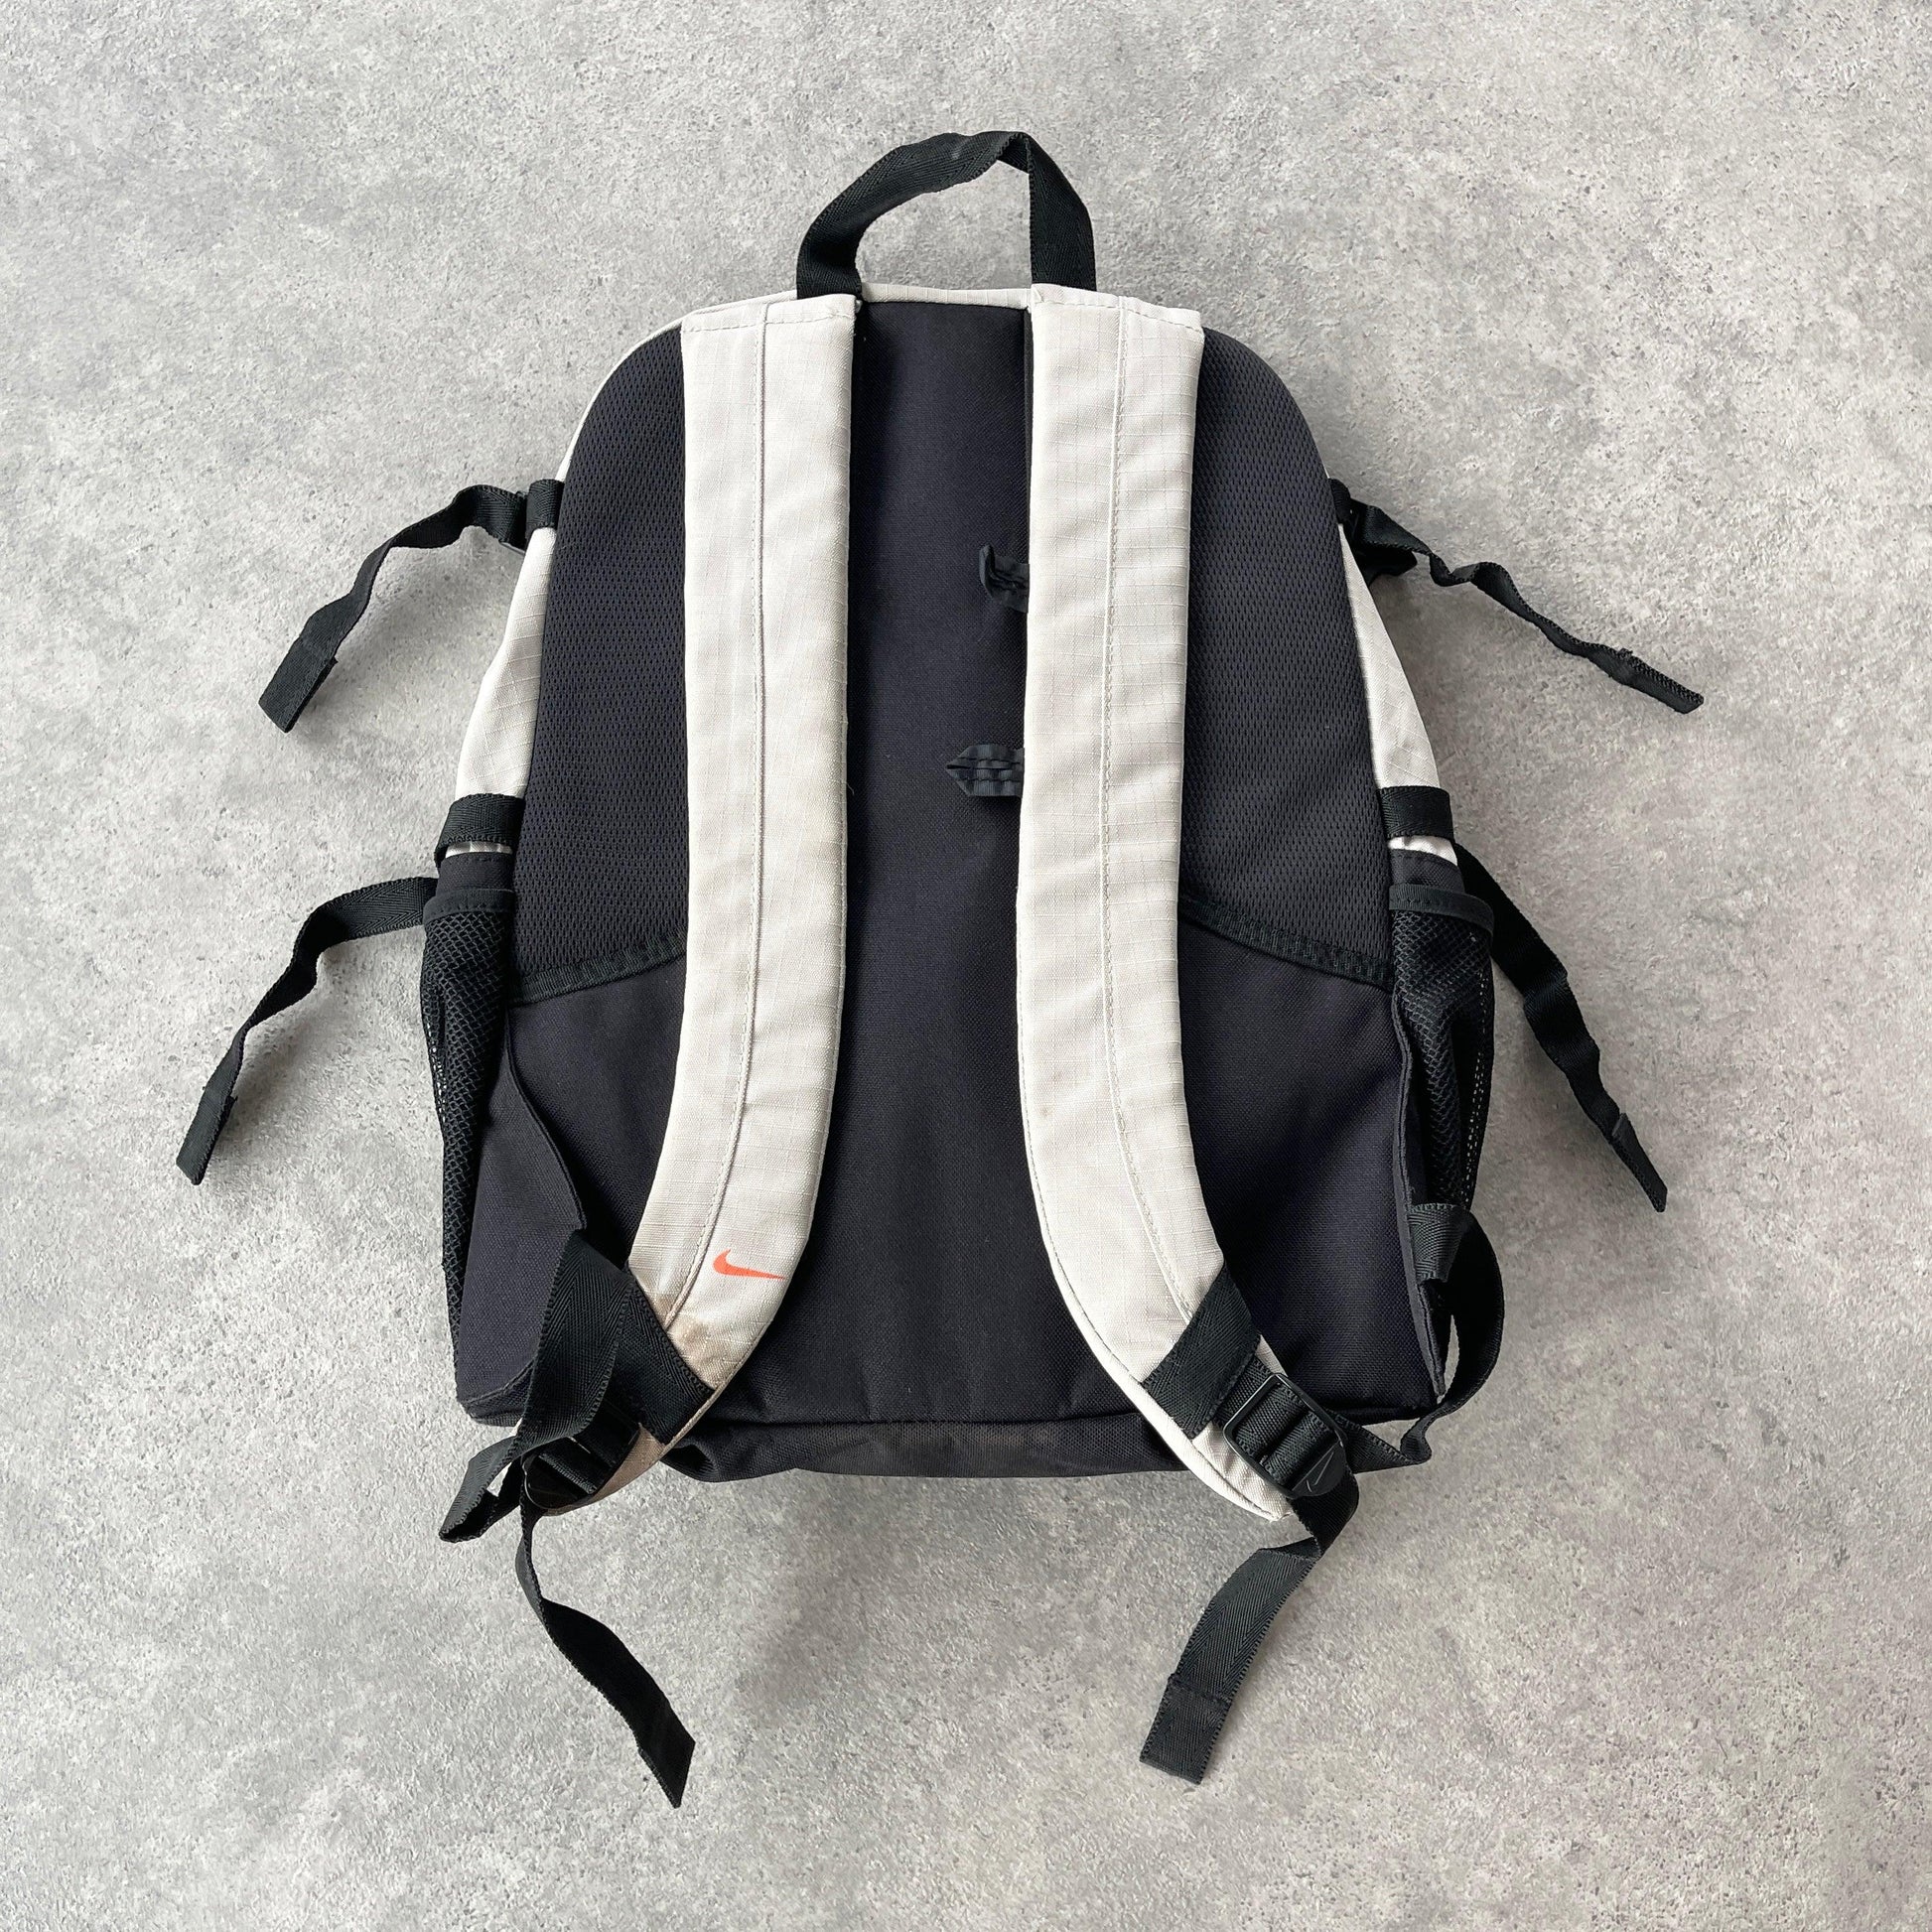 Nike 1990s 40L technical backpack (18”x14”x10”) - Known Source